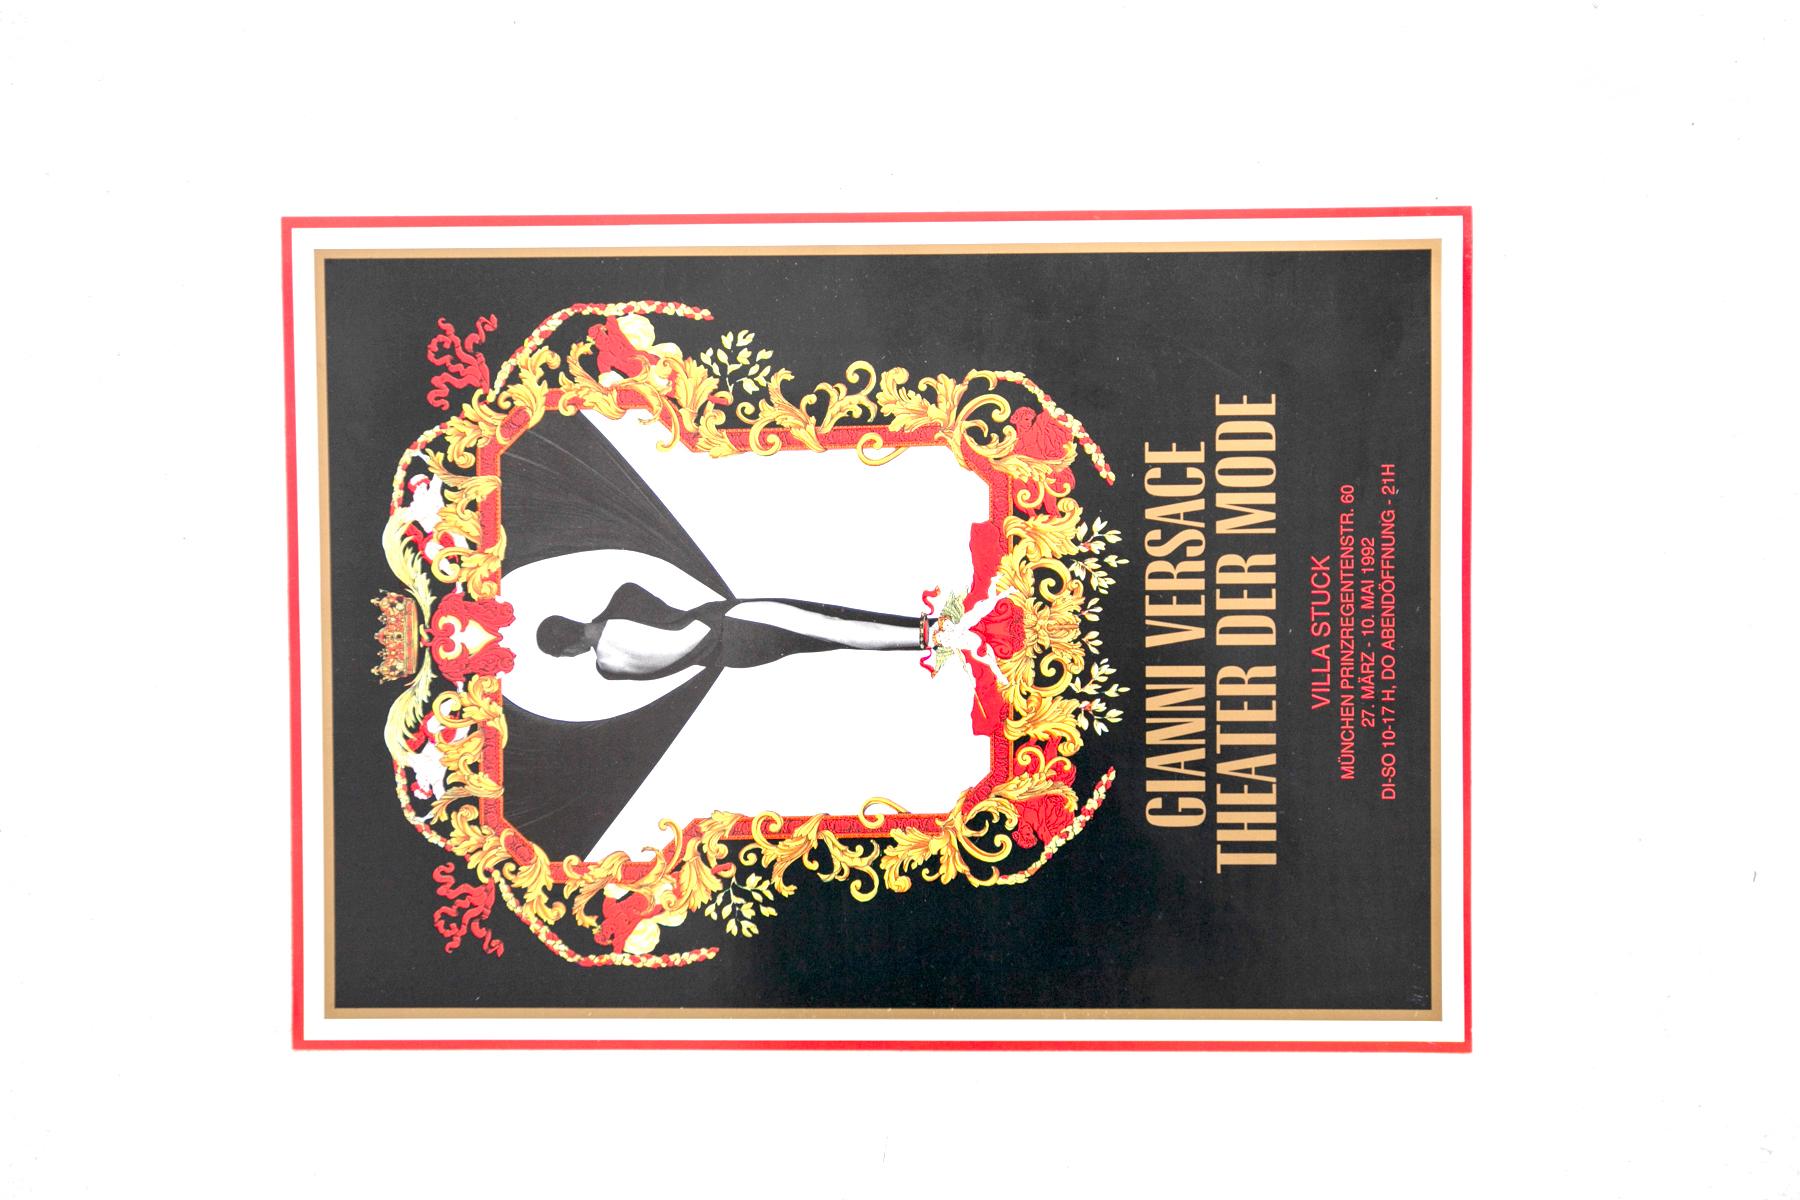 Poster by Gianni Versace for the opening of the exhibition 